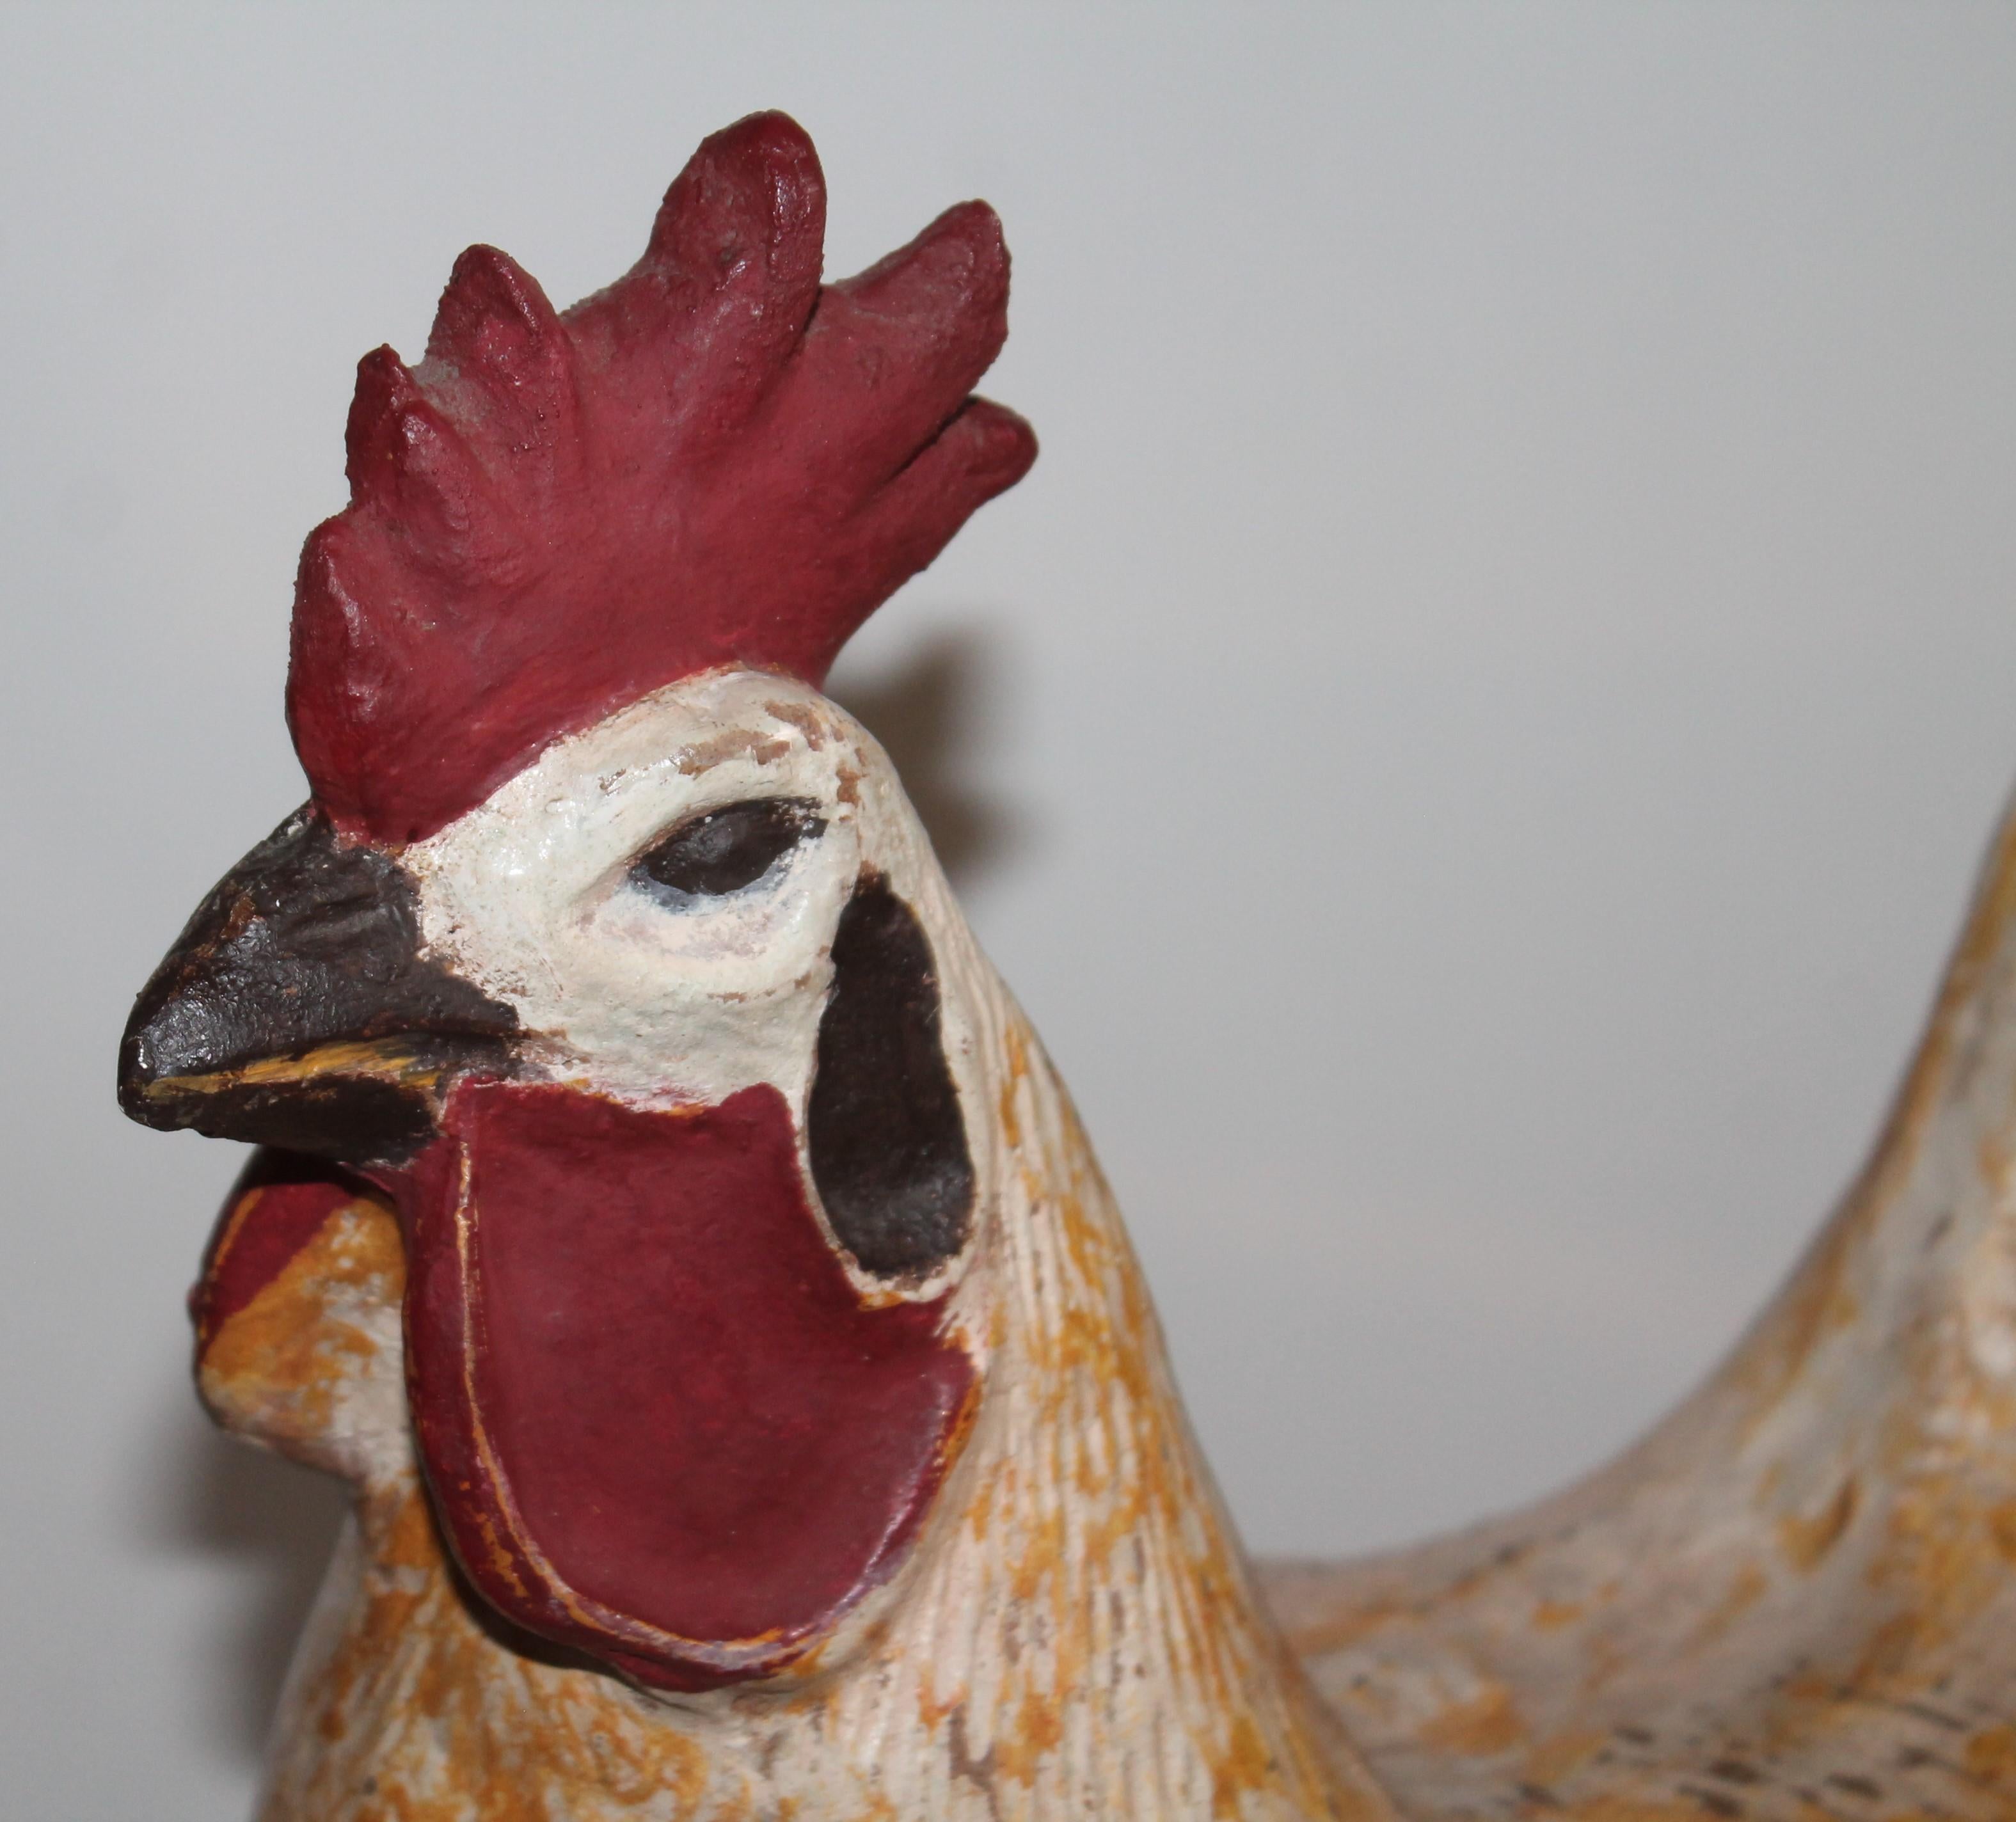 American Painted Chicken of Concrete or Garden Ornament